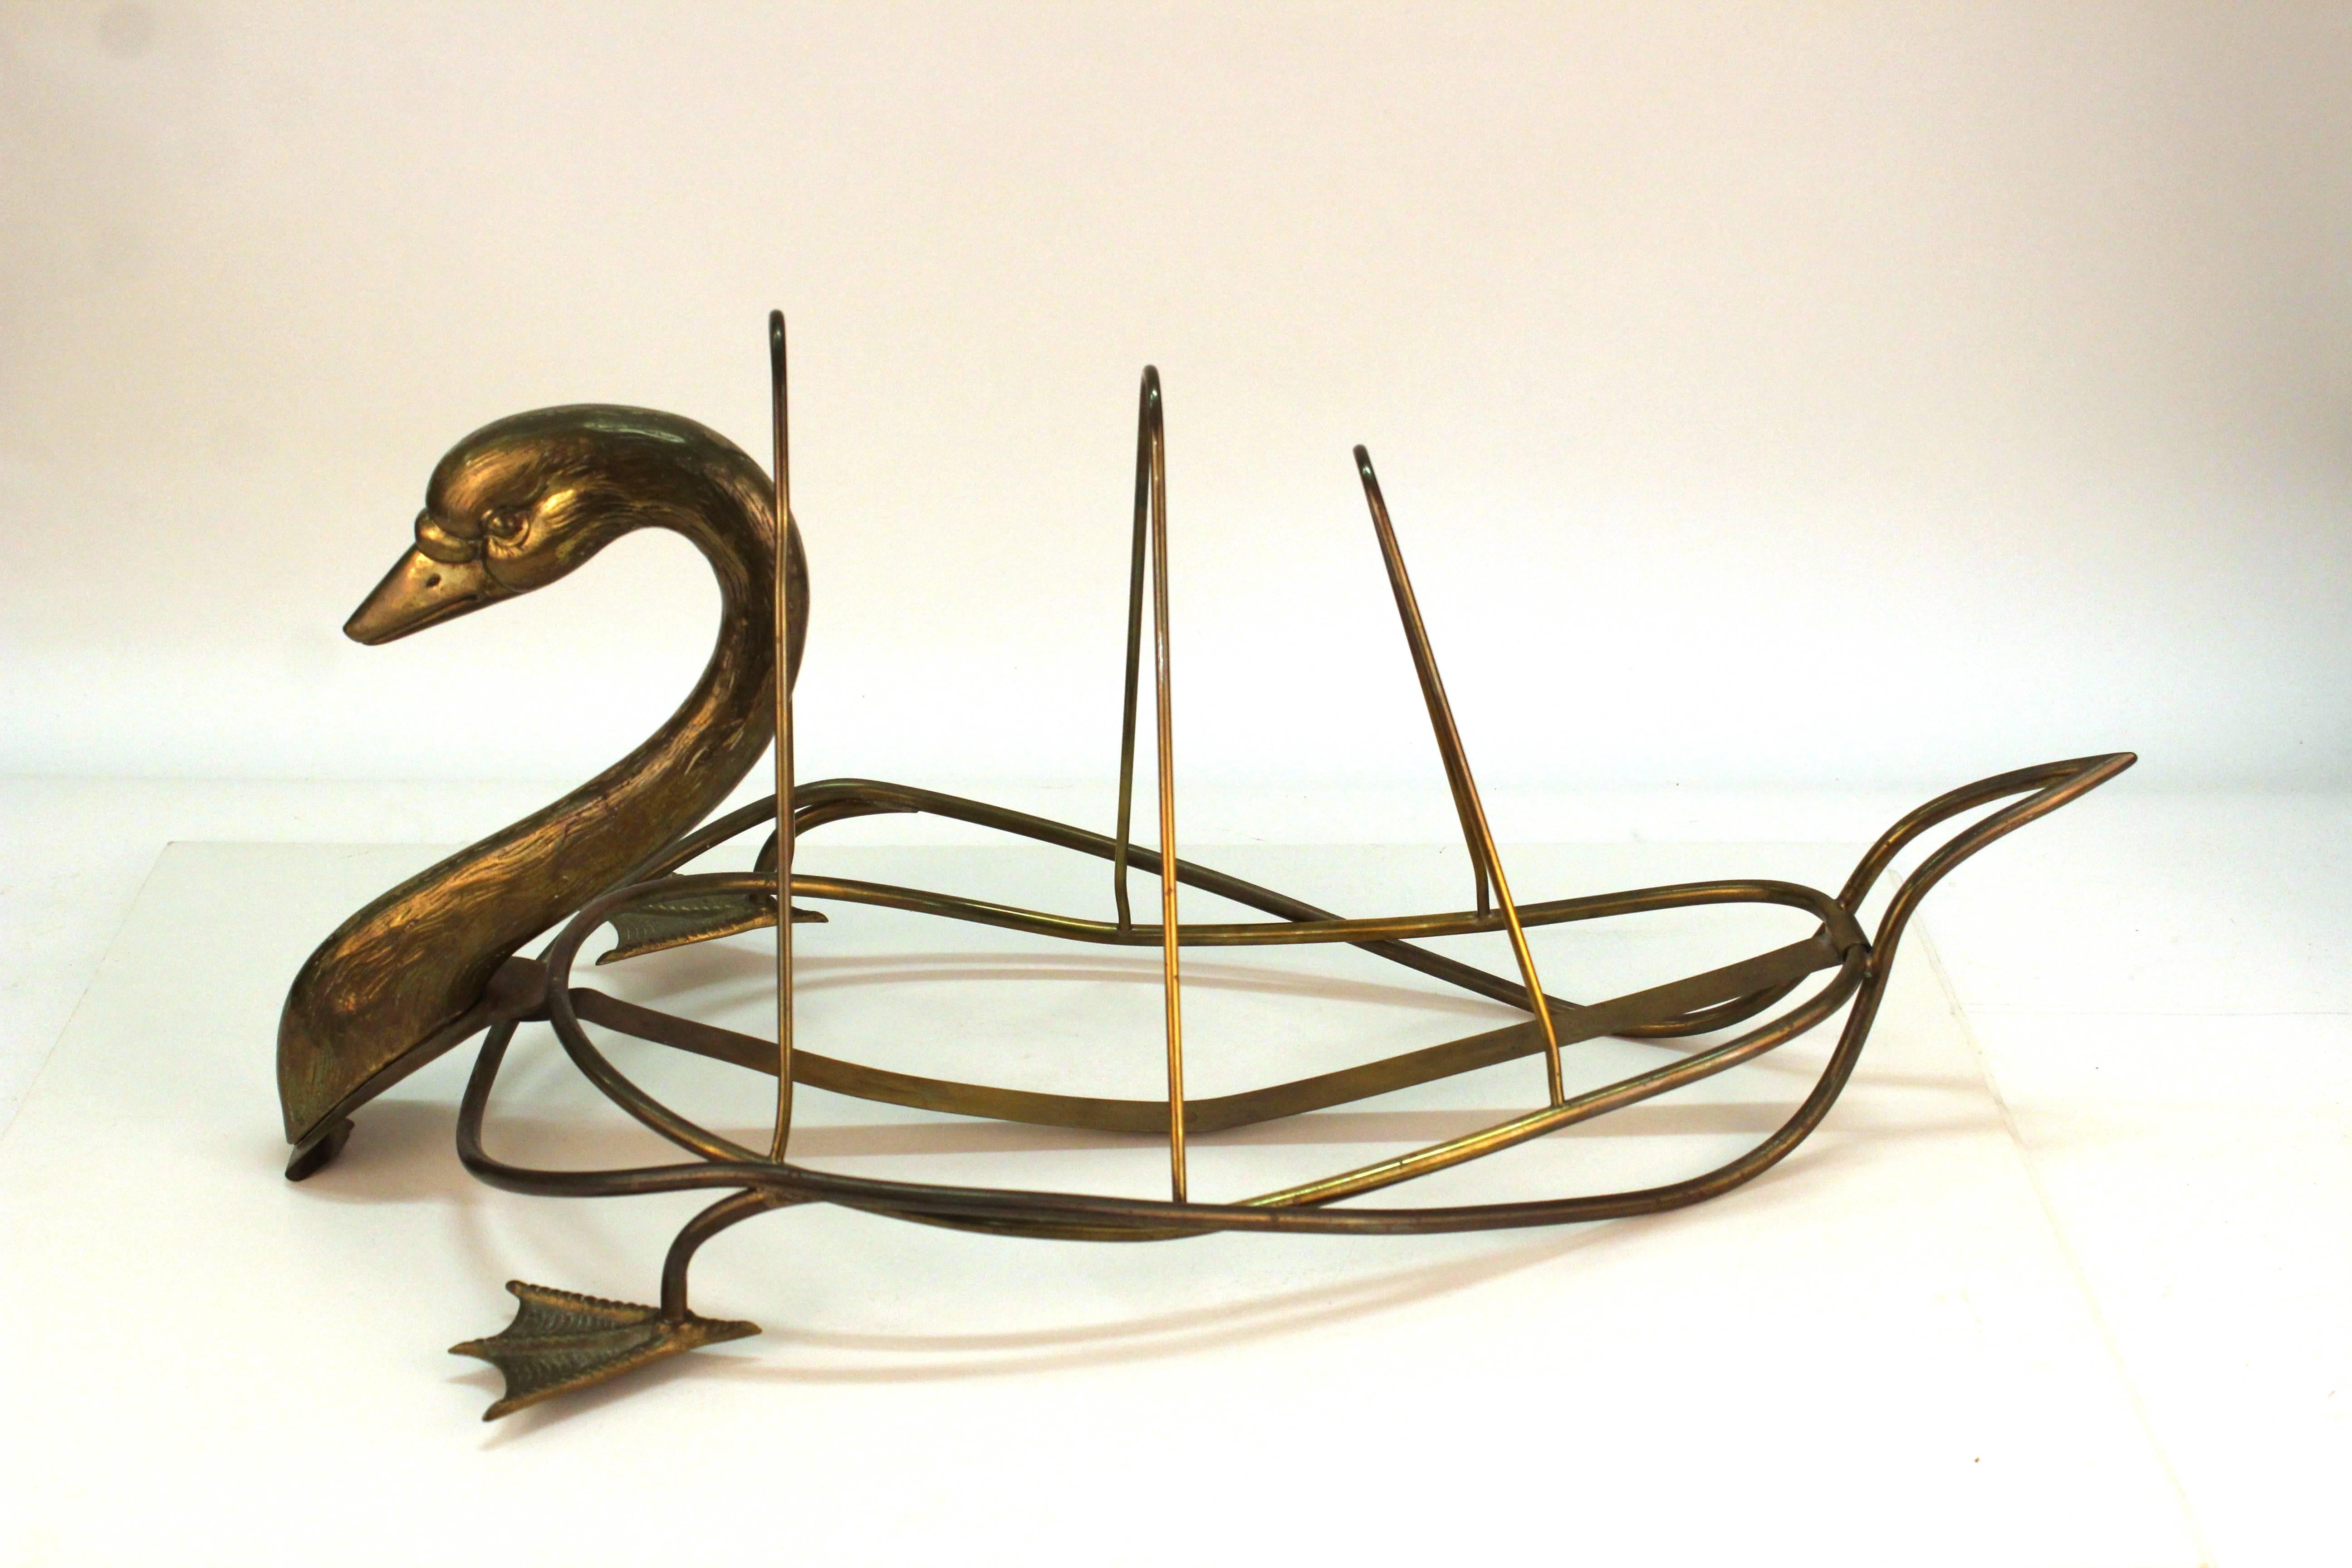 A brass newspaper holder in the shape of a swan by Maison Jansen. Includes life-like head and feet. Three divisions suggest the body of the swan. Despite some wear appropriate to age and use the stand is in good condition.